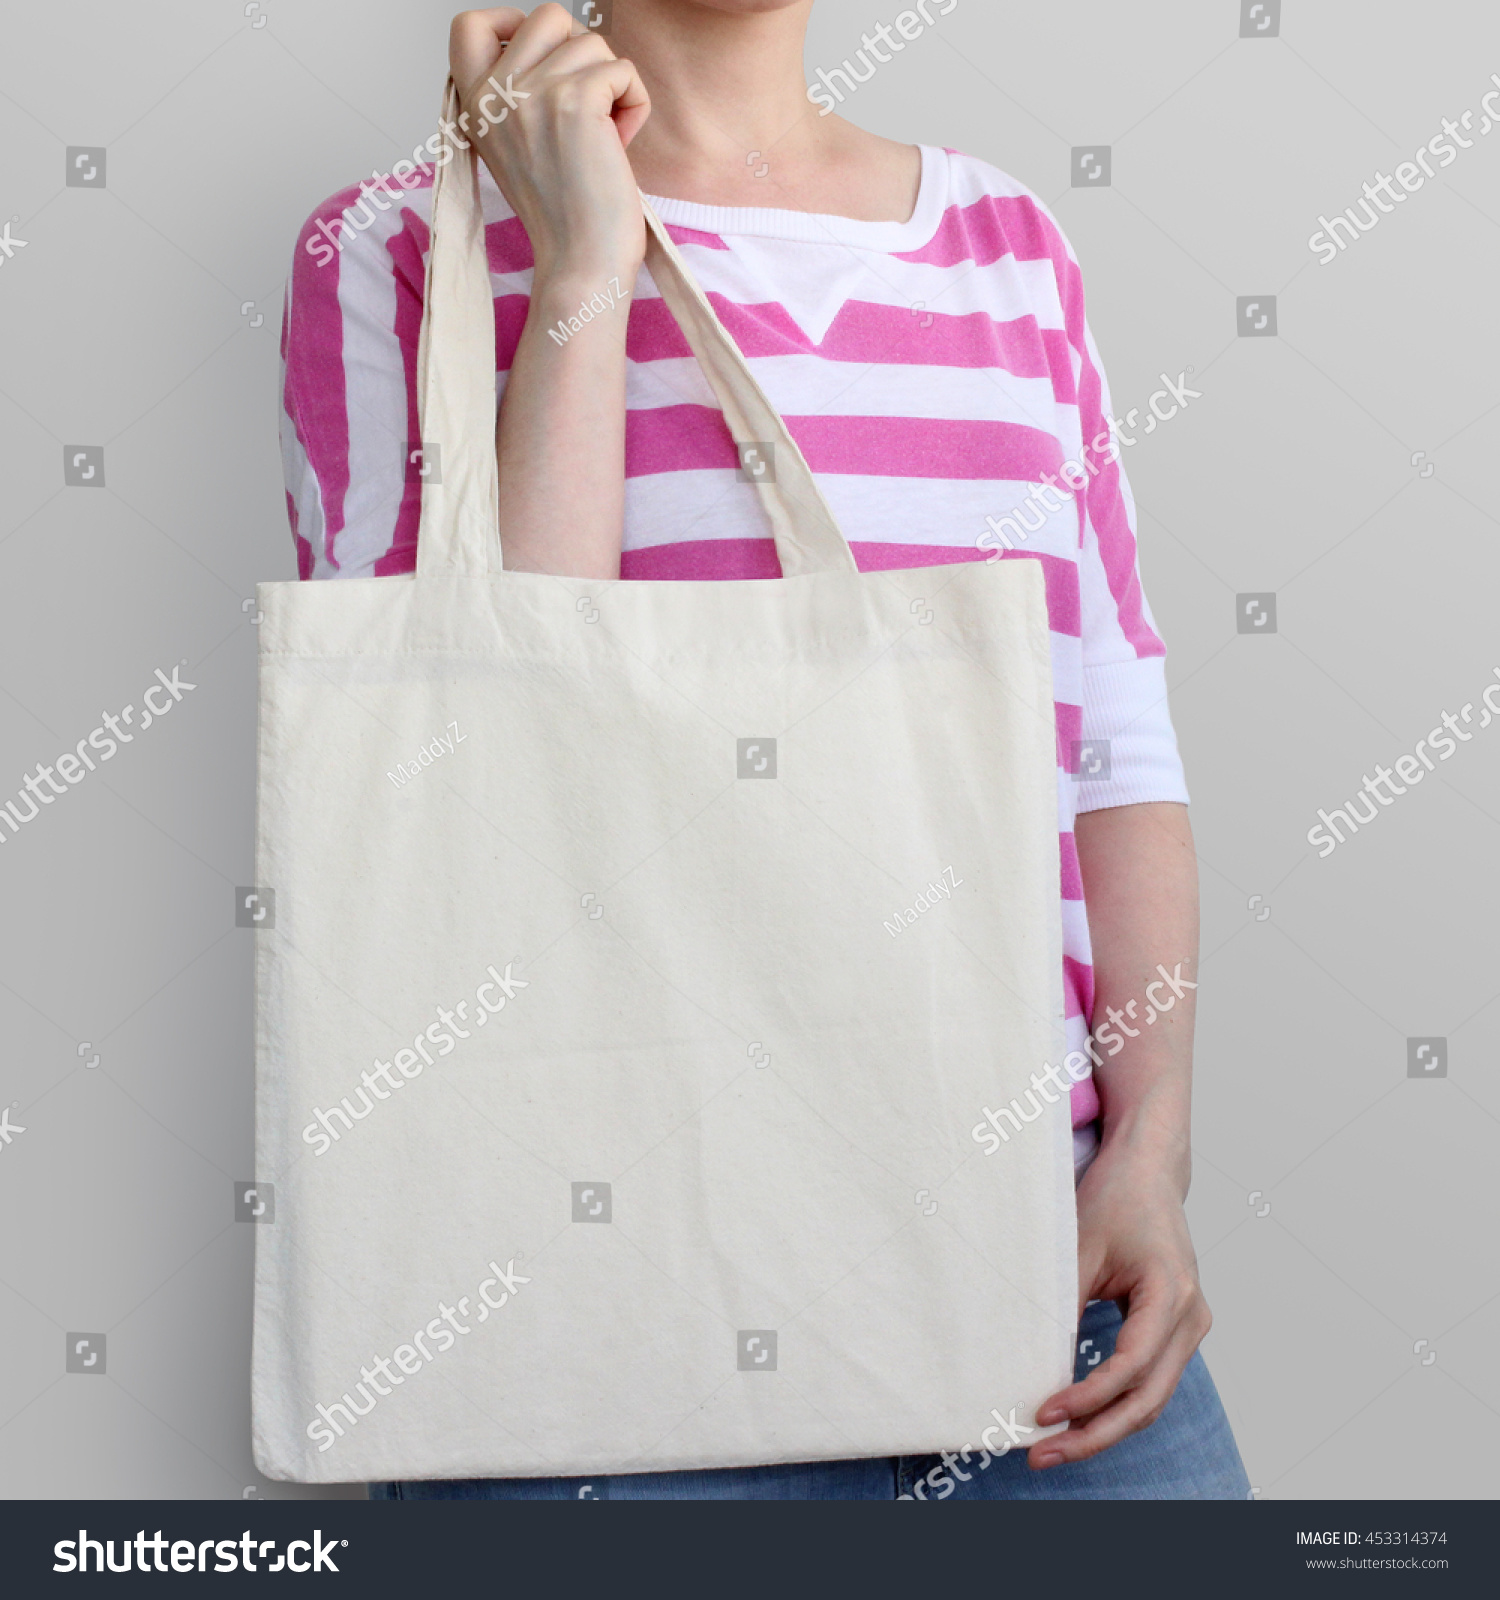 Girl Holding Blank Cotton Eco Tote Stock Photo 453314374 - Shutterstock